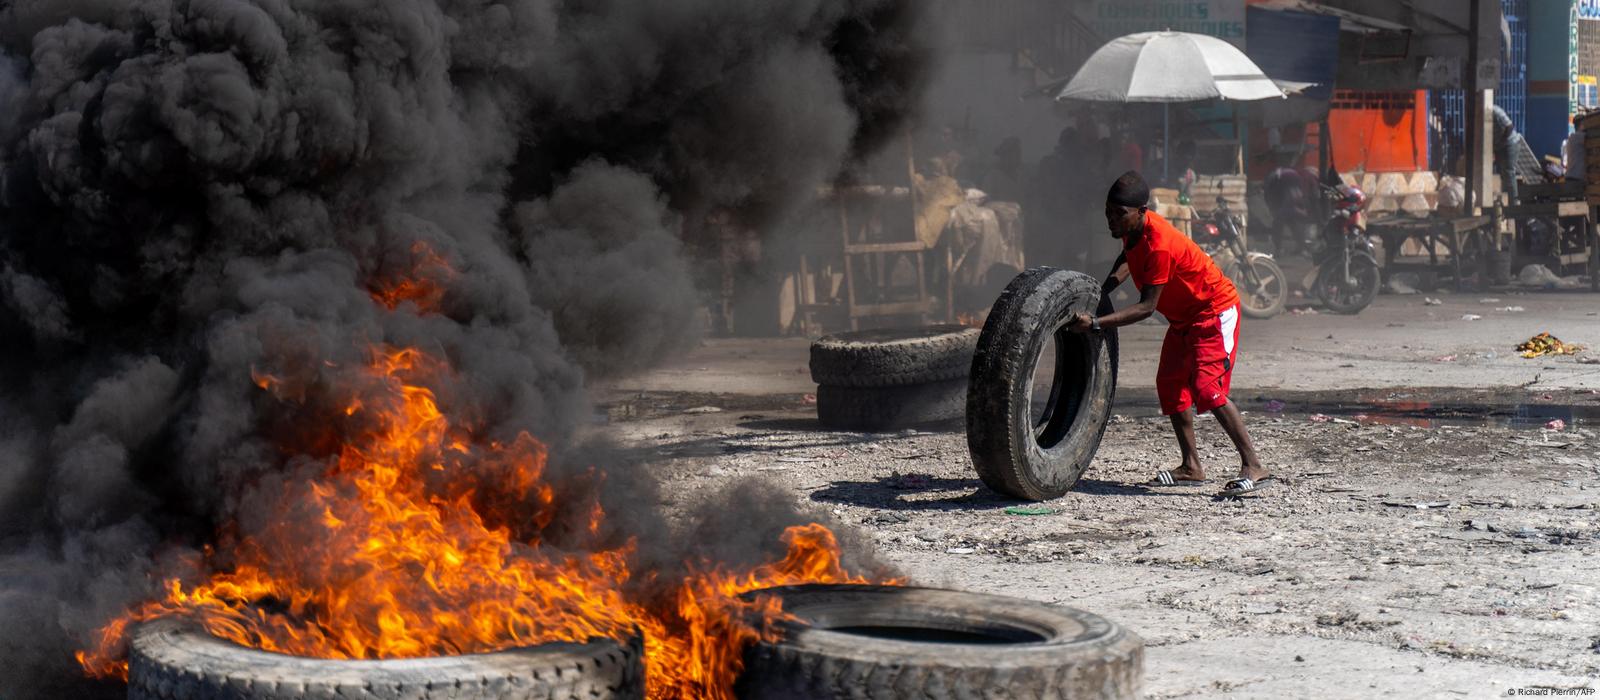 A man rolling a tire into a blockade of burning tires on the streets of Port-au-Prince